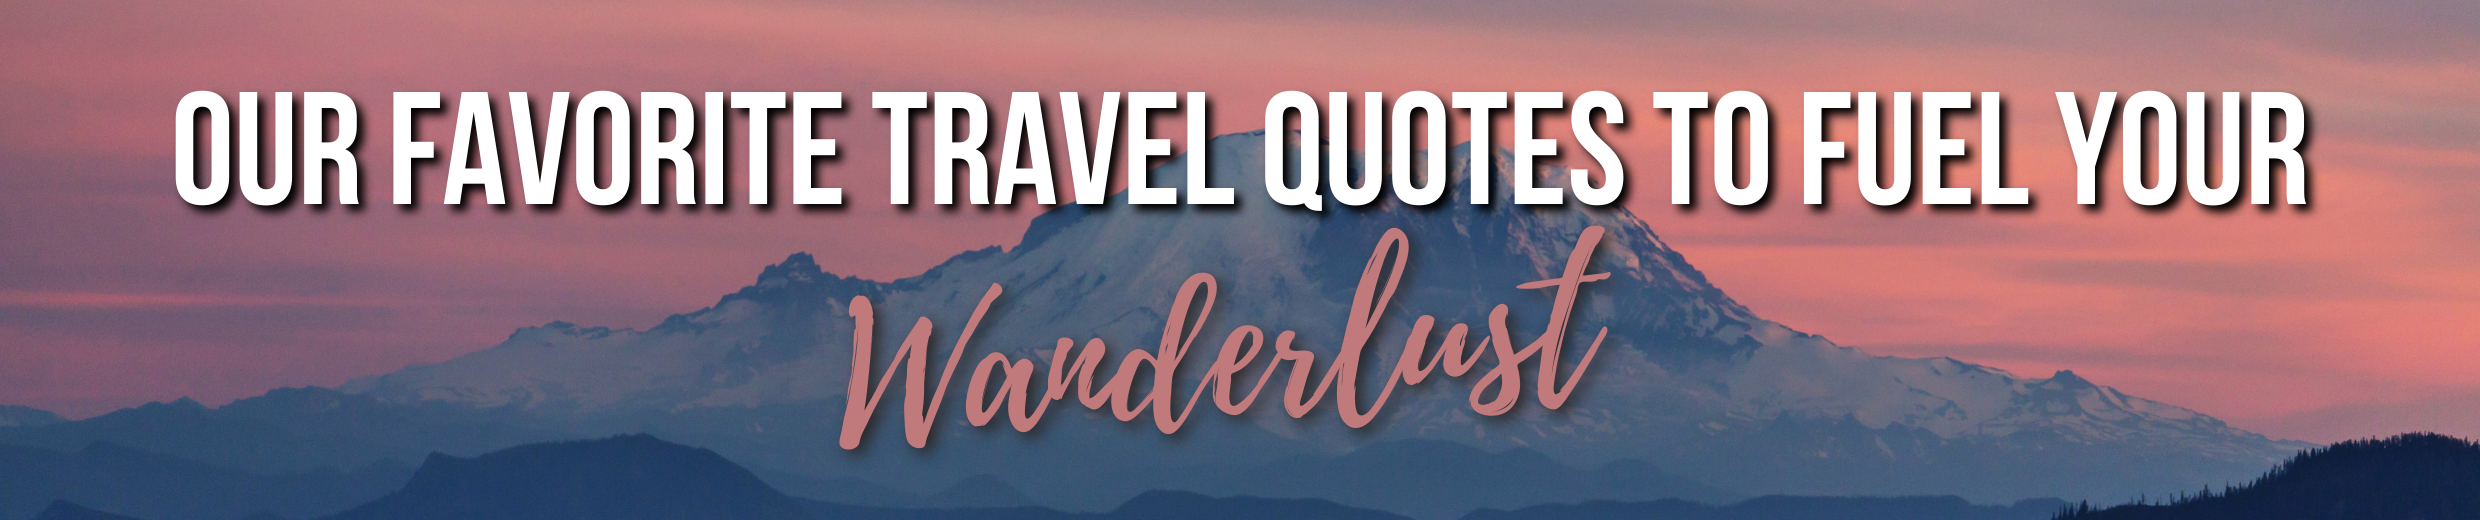 Our Favorite Travel Quotes to Fuel Your Wanderlust